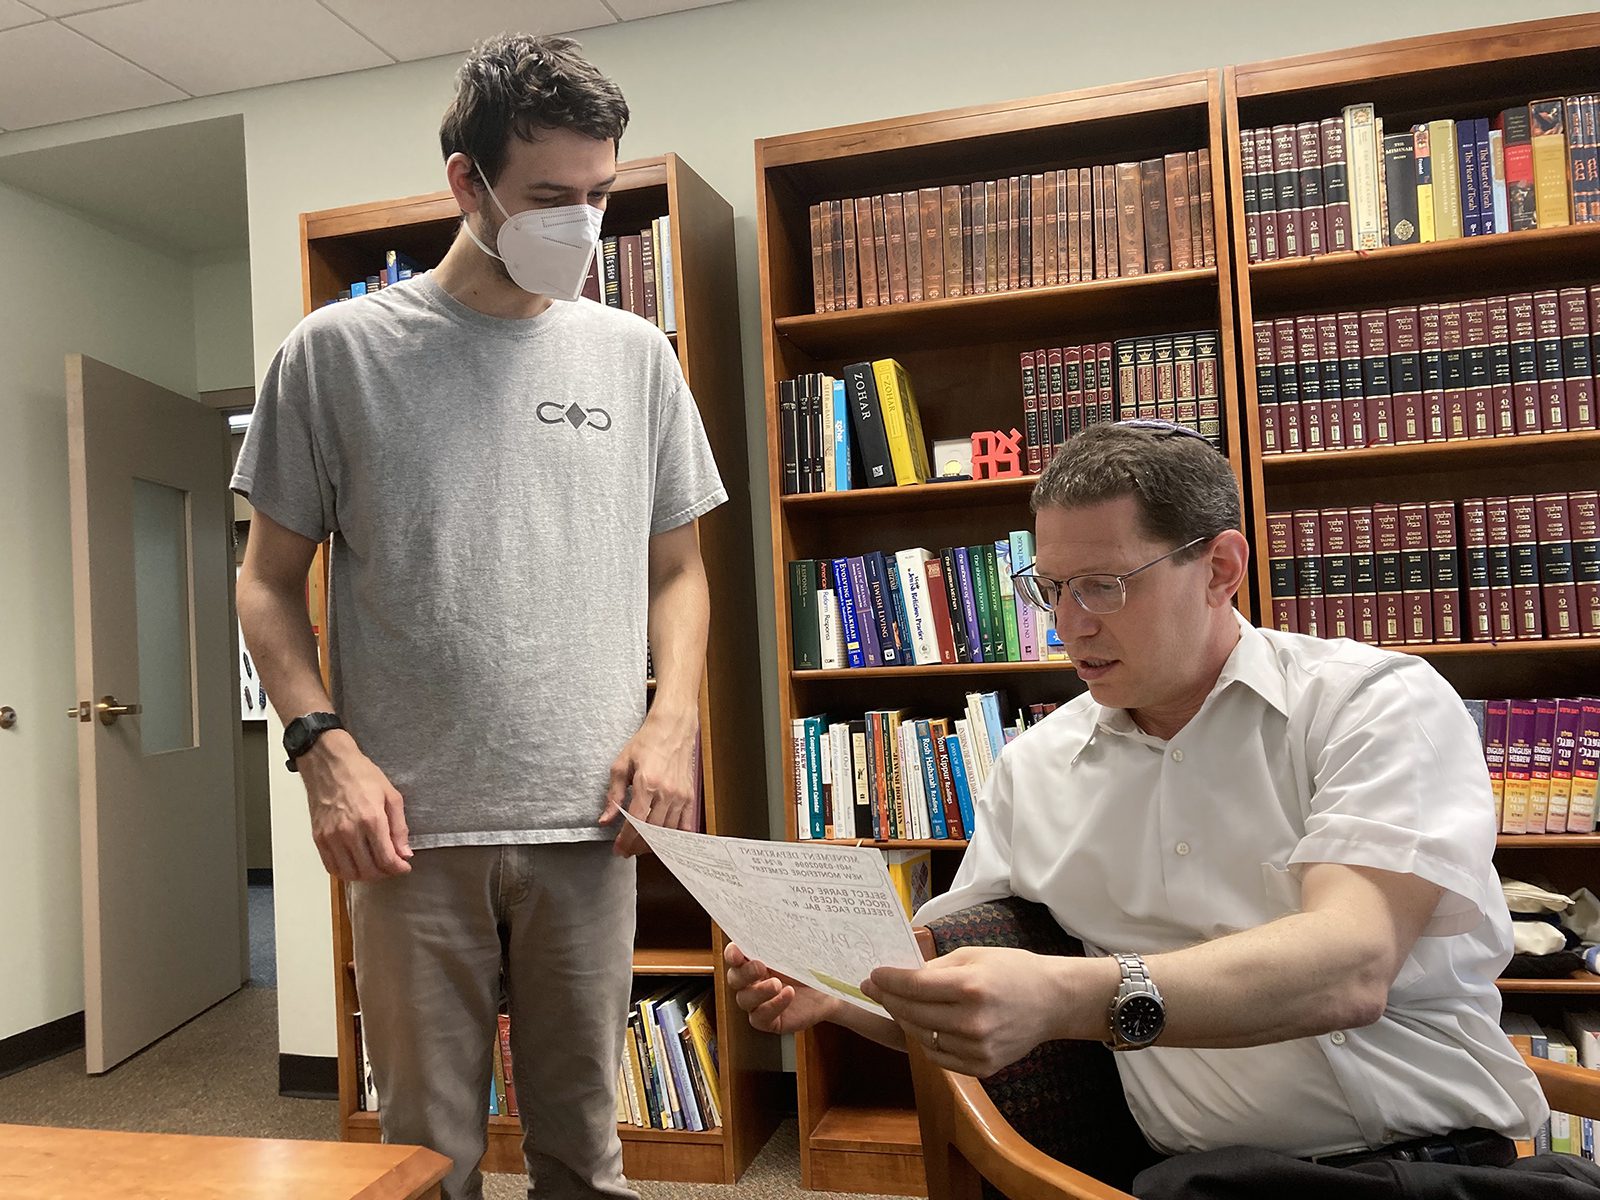 Rabbi Charlie Cytron Walker, right, speaks with Ben Breakstone, engagement and media coordinator, atTemple Emanuel in Winston-Salem, North Carolina, July 13, 2022. RNS photo by Yonat Shimron